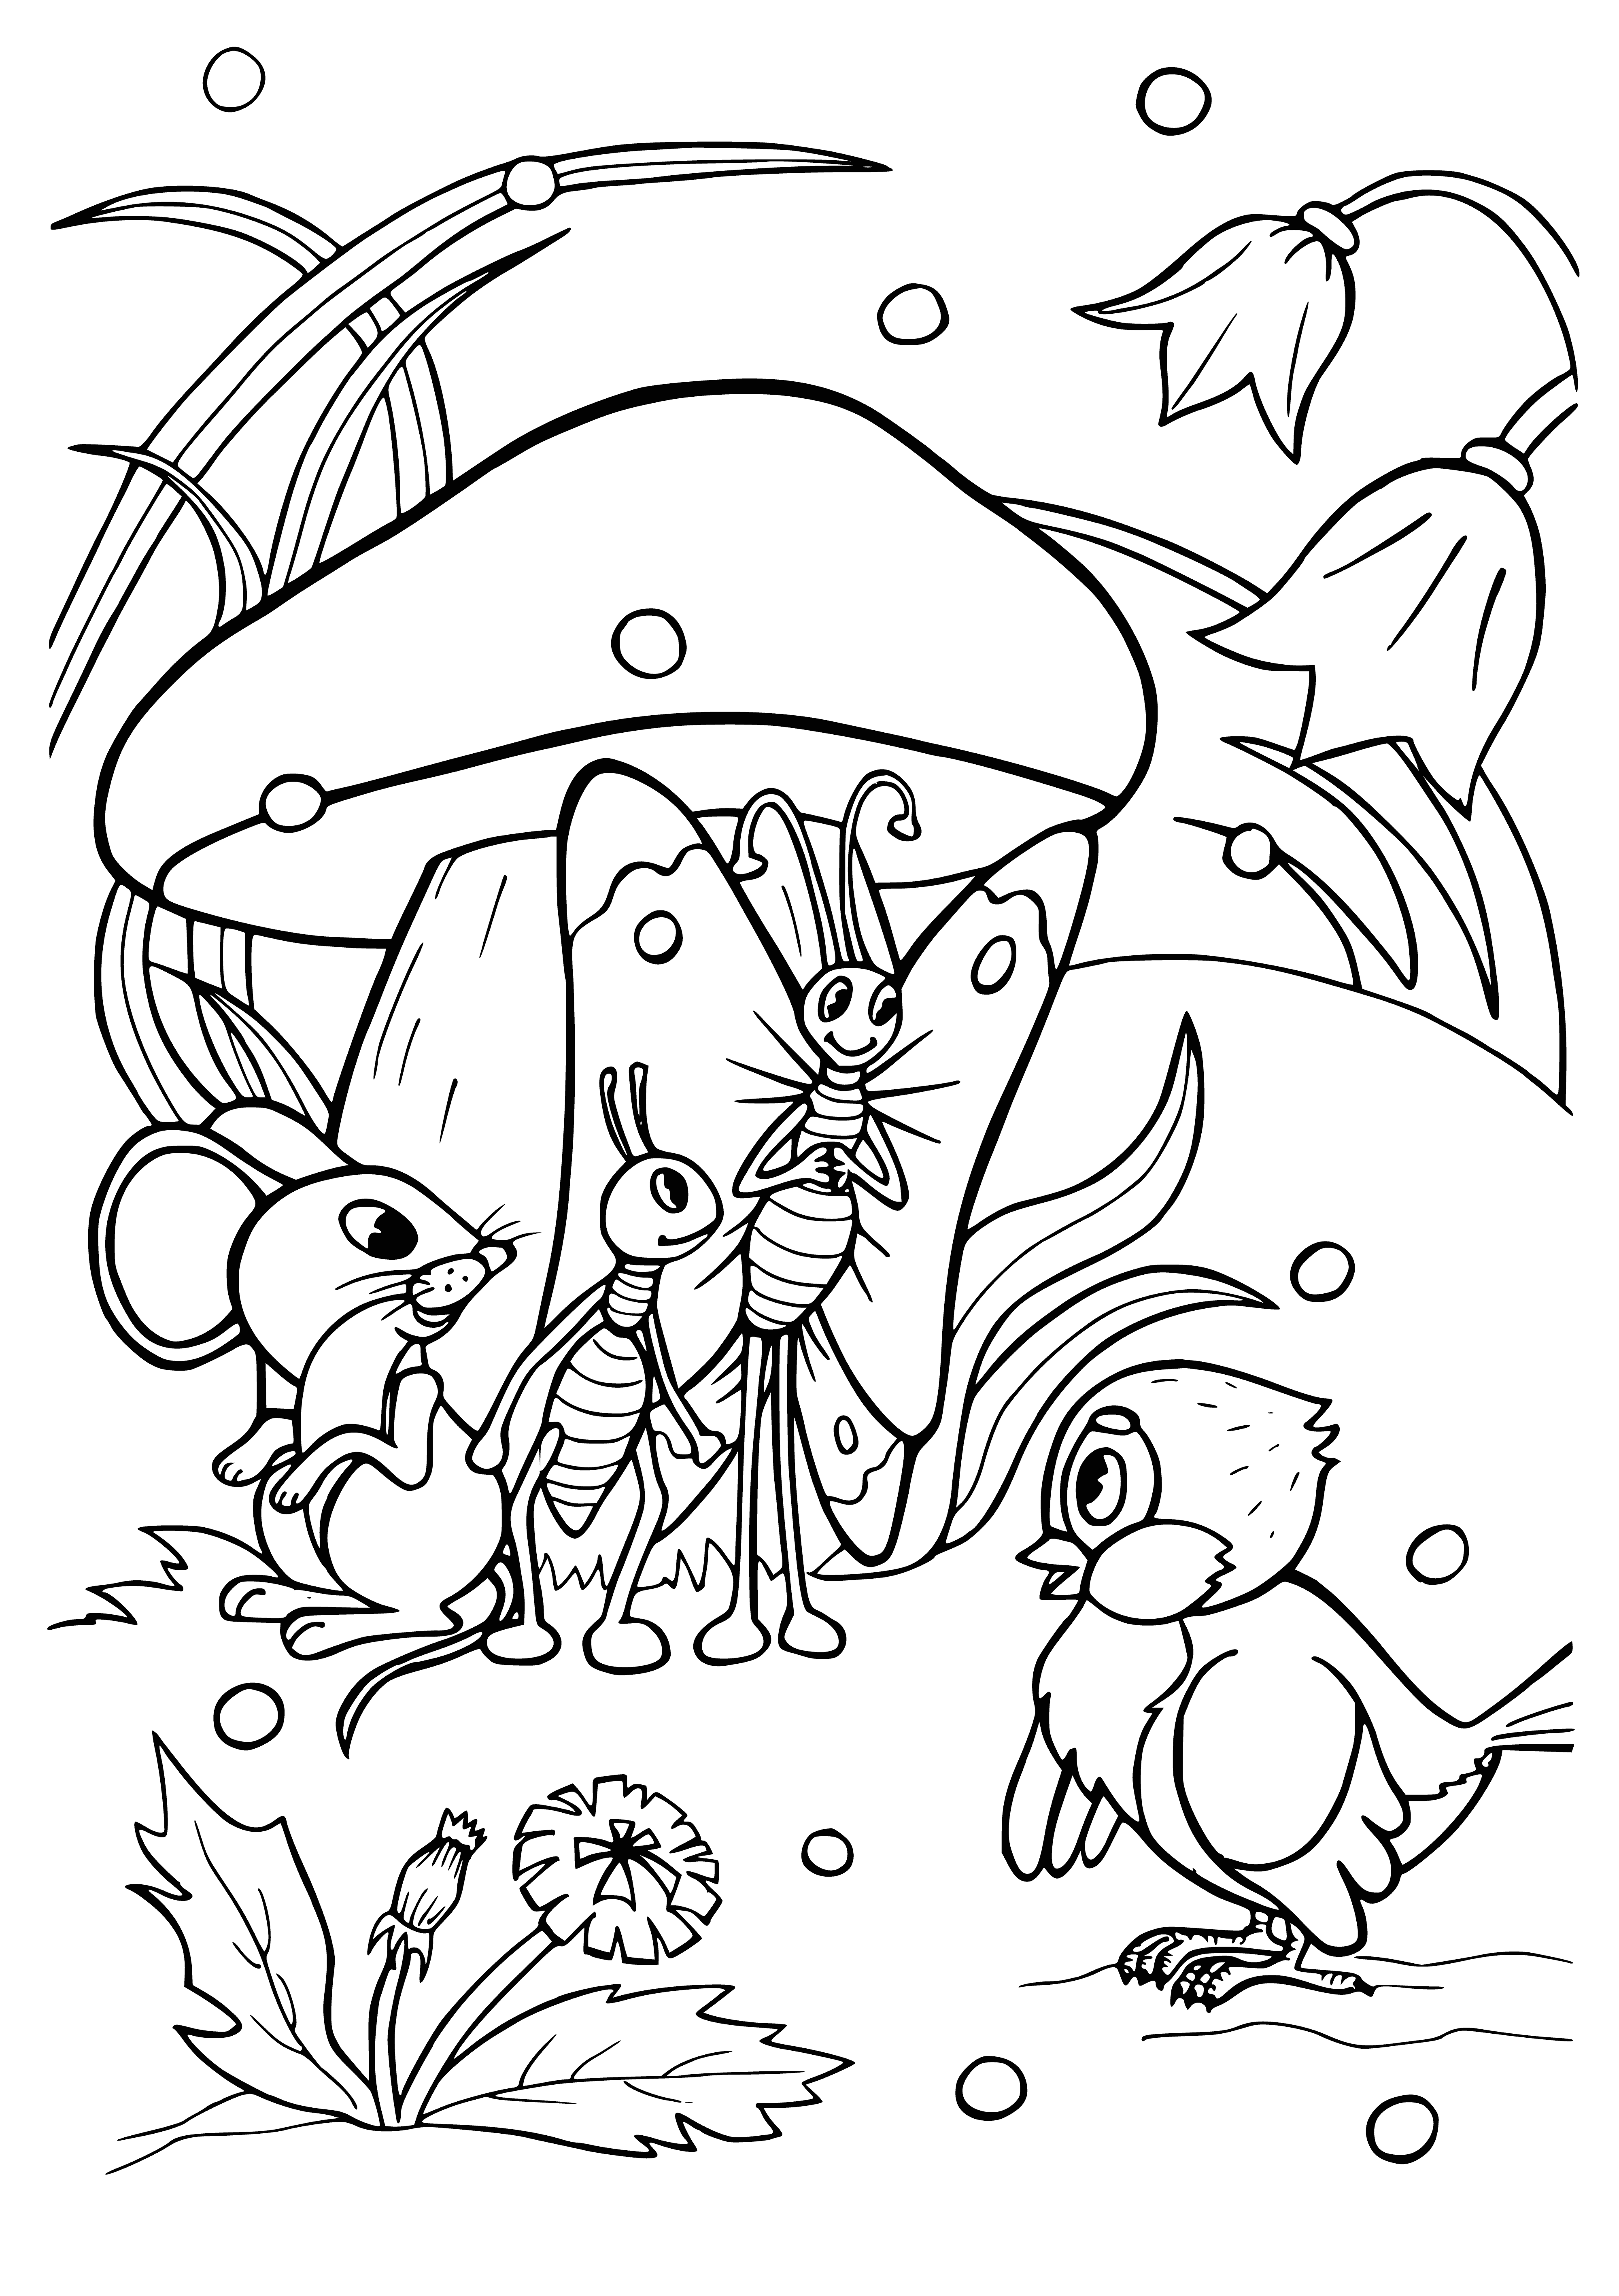 coloring page: A sparrow perched atop a brown-and-white-spotted mushroom with brown and gray feathers, a yellow beak and black eyes.